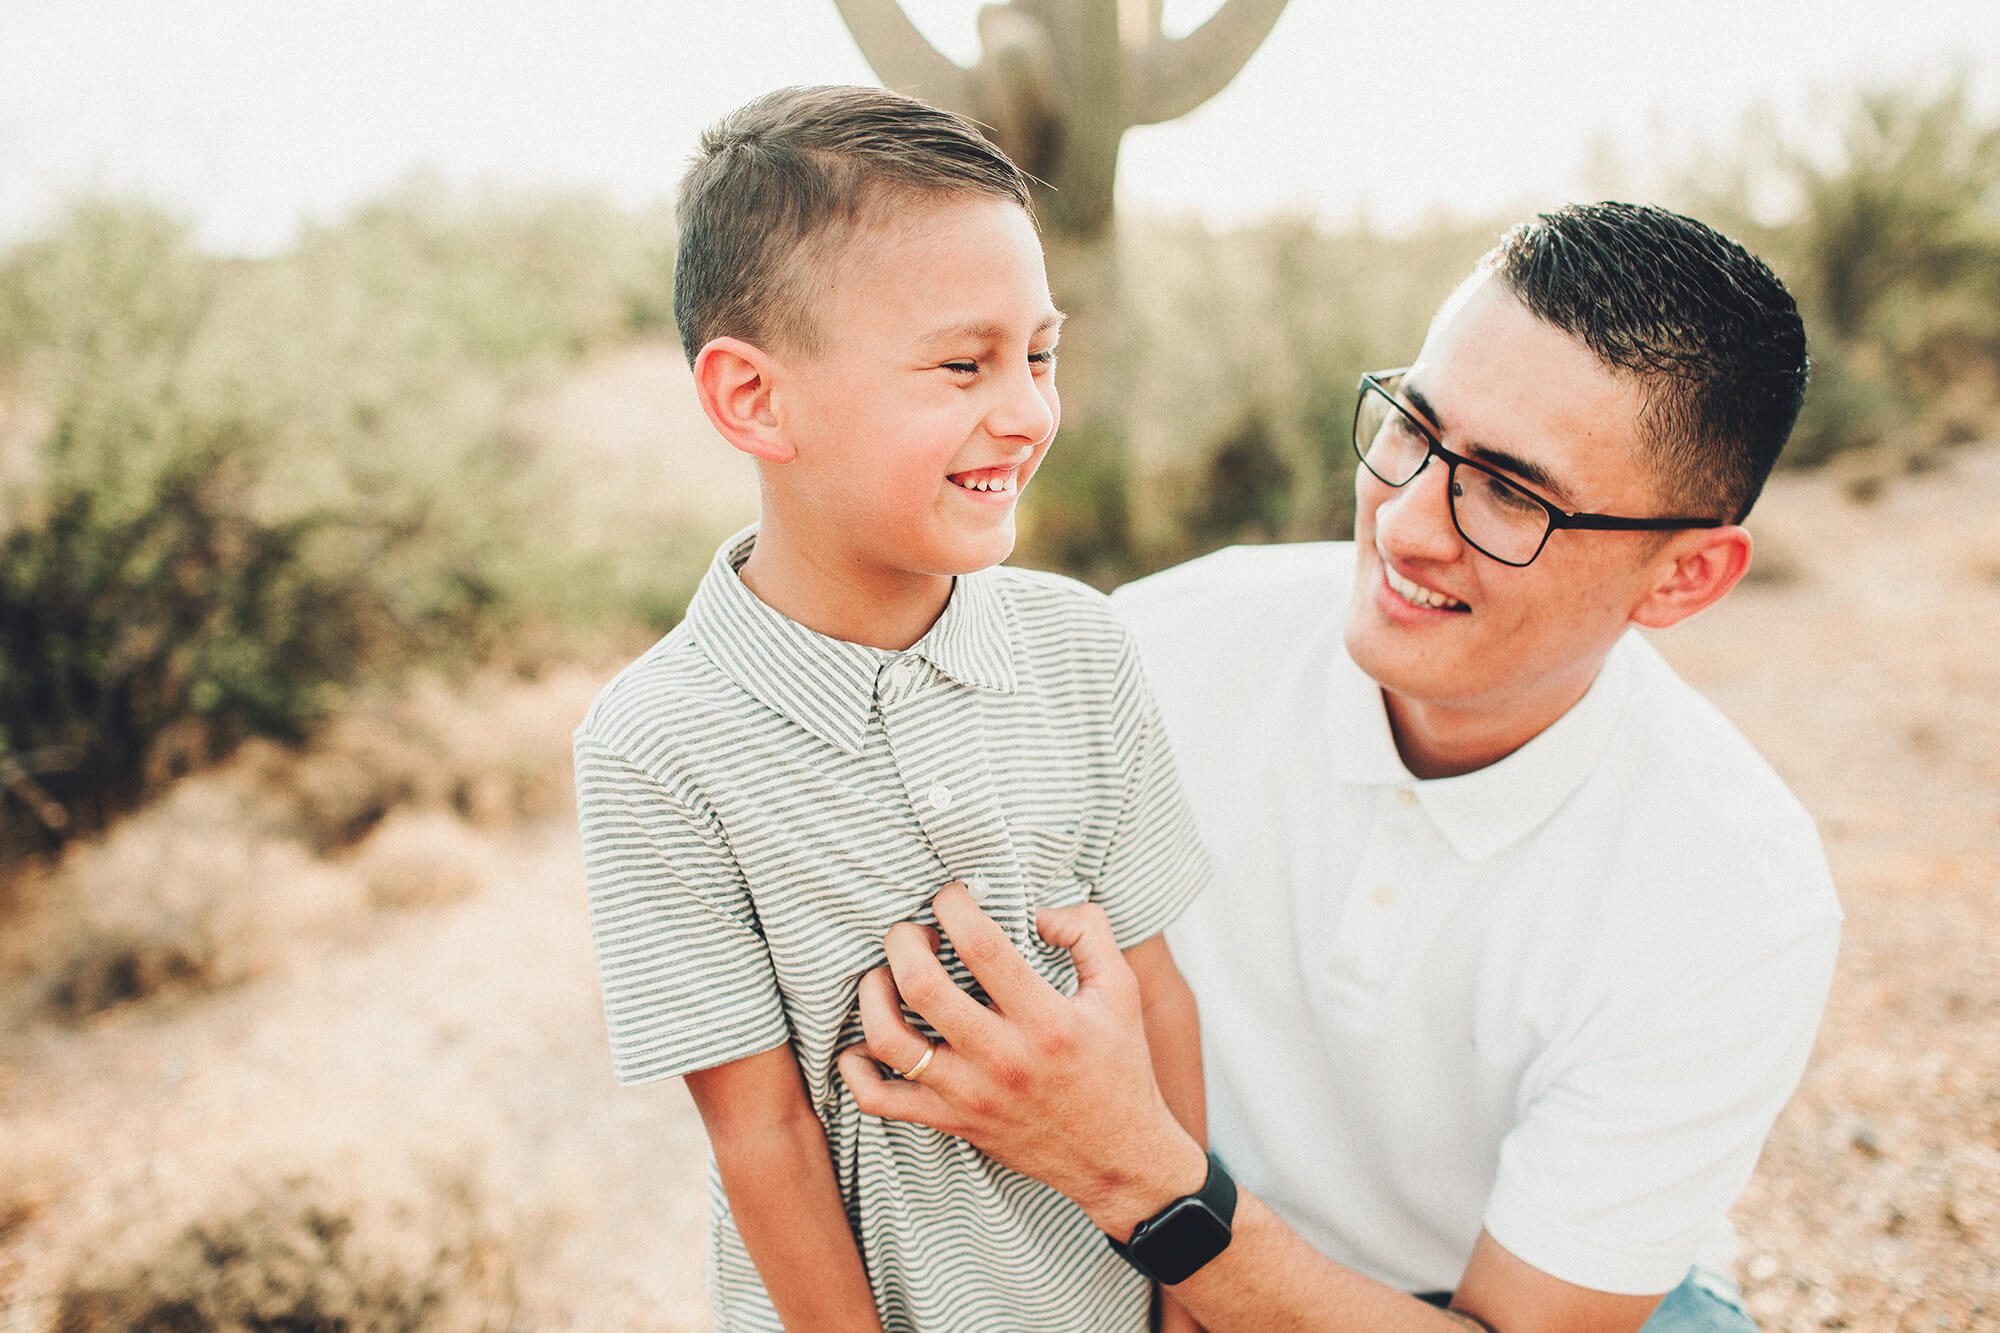 Nothing better than tickles from dad during this desert session at Saguaro National Park